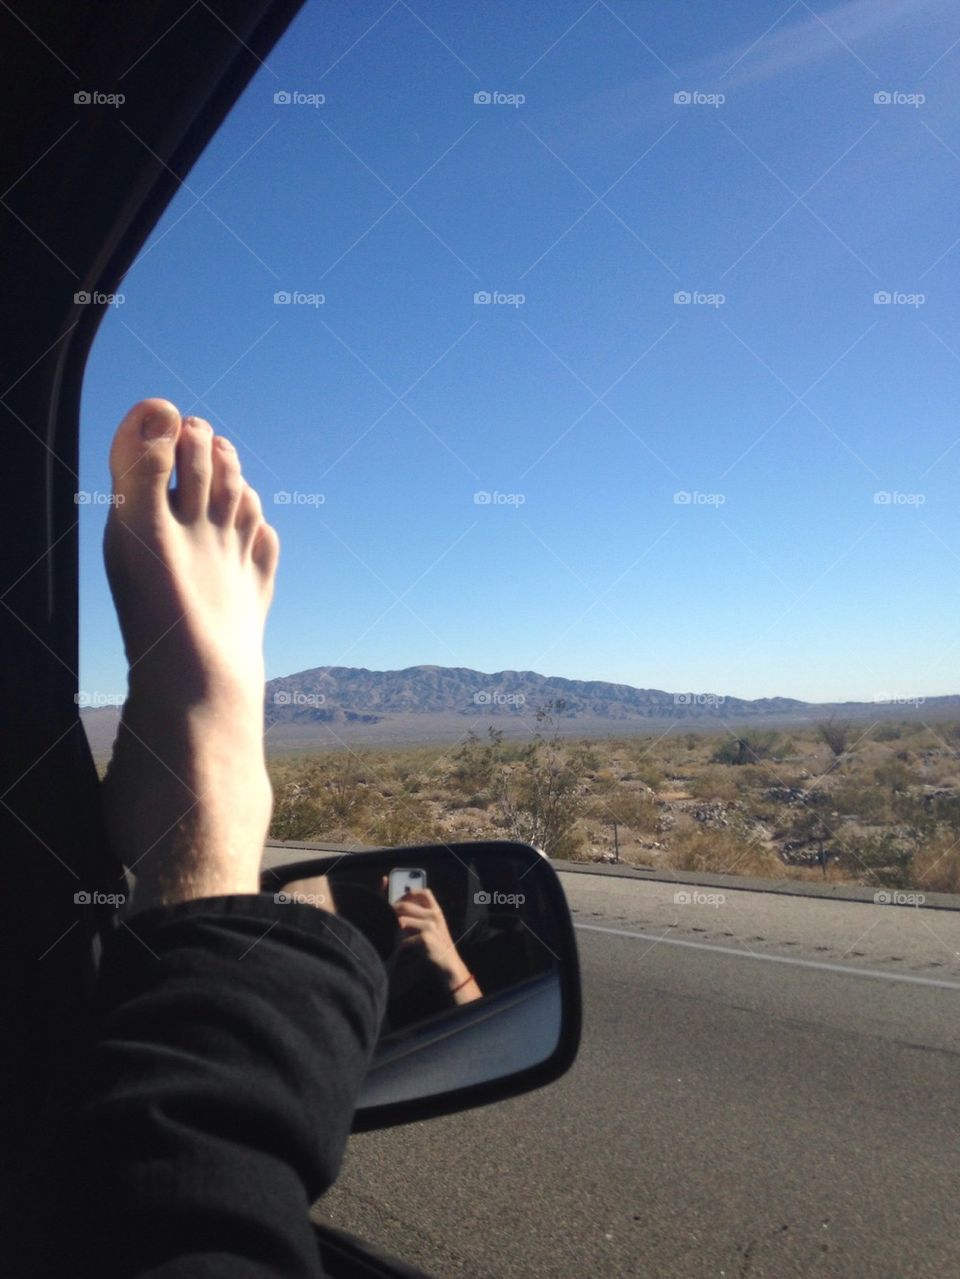 Foot out the window